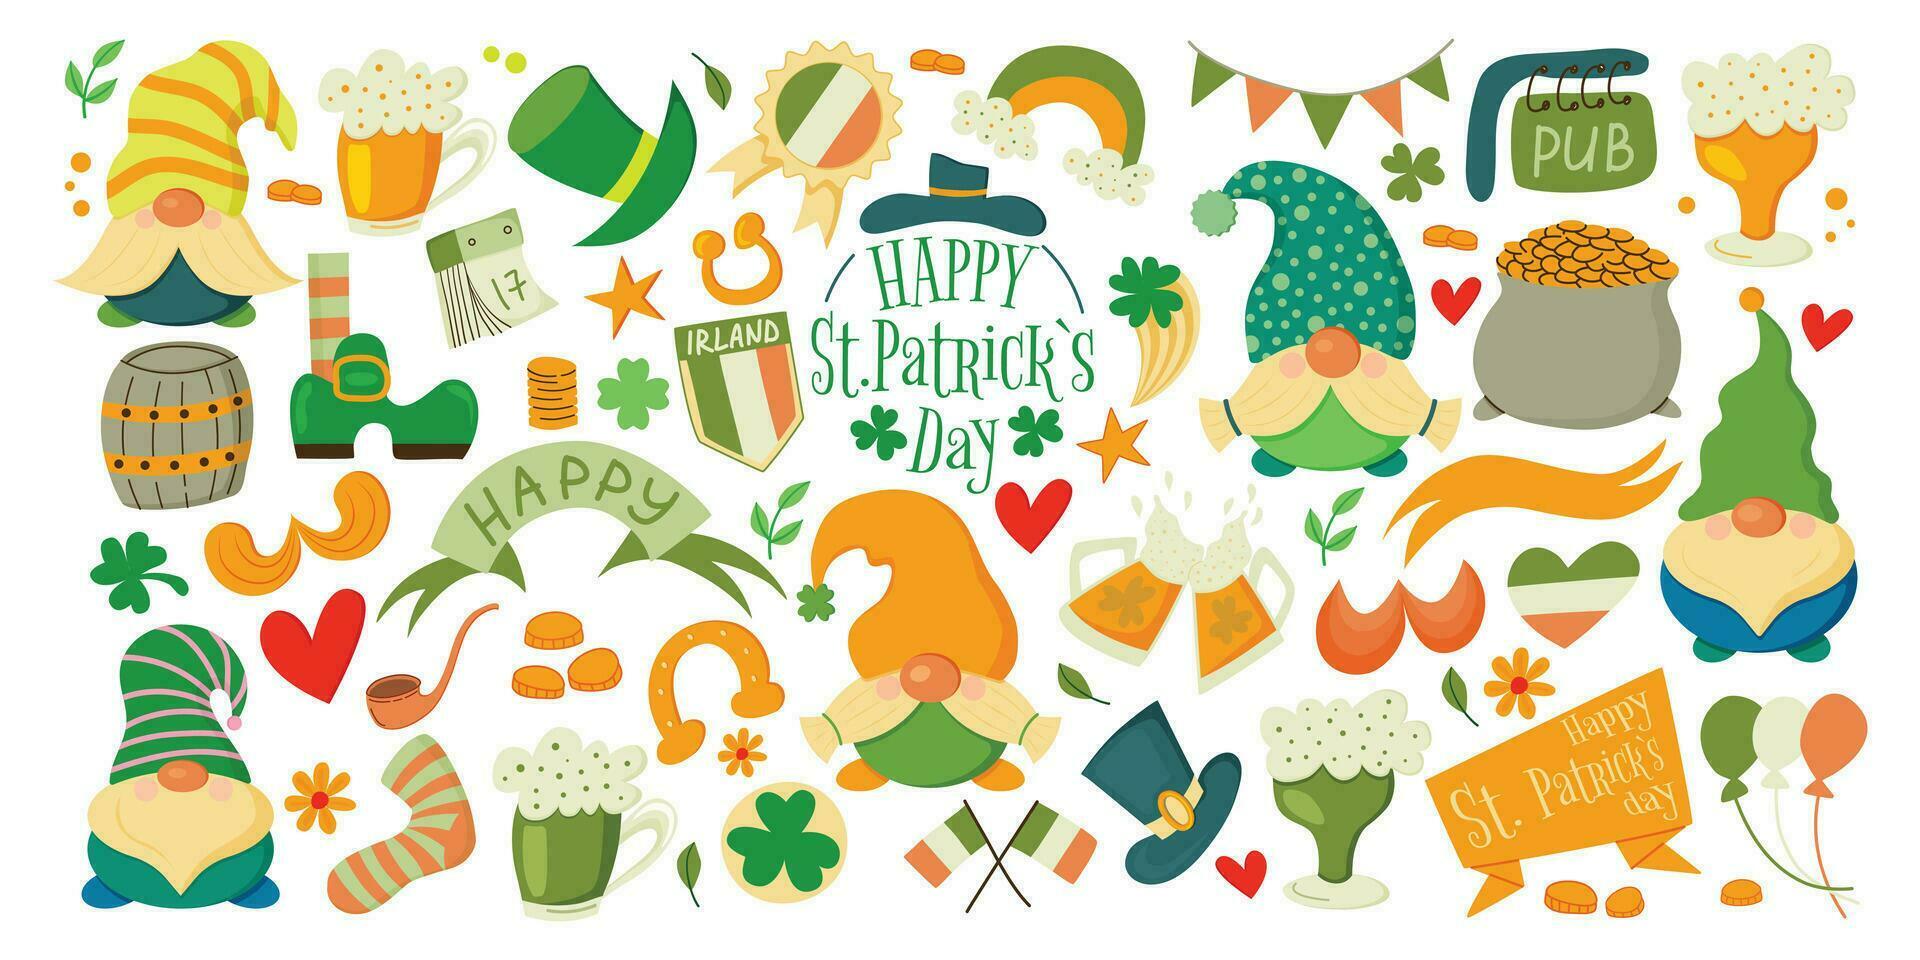 Saint Patrick s Day traditional symbols collection. Irish flags, beer mugs, clover, rainbow, leprechaun hat, pot of gold coins vector